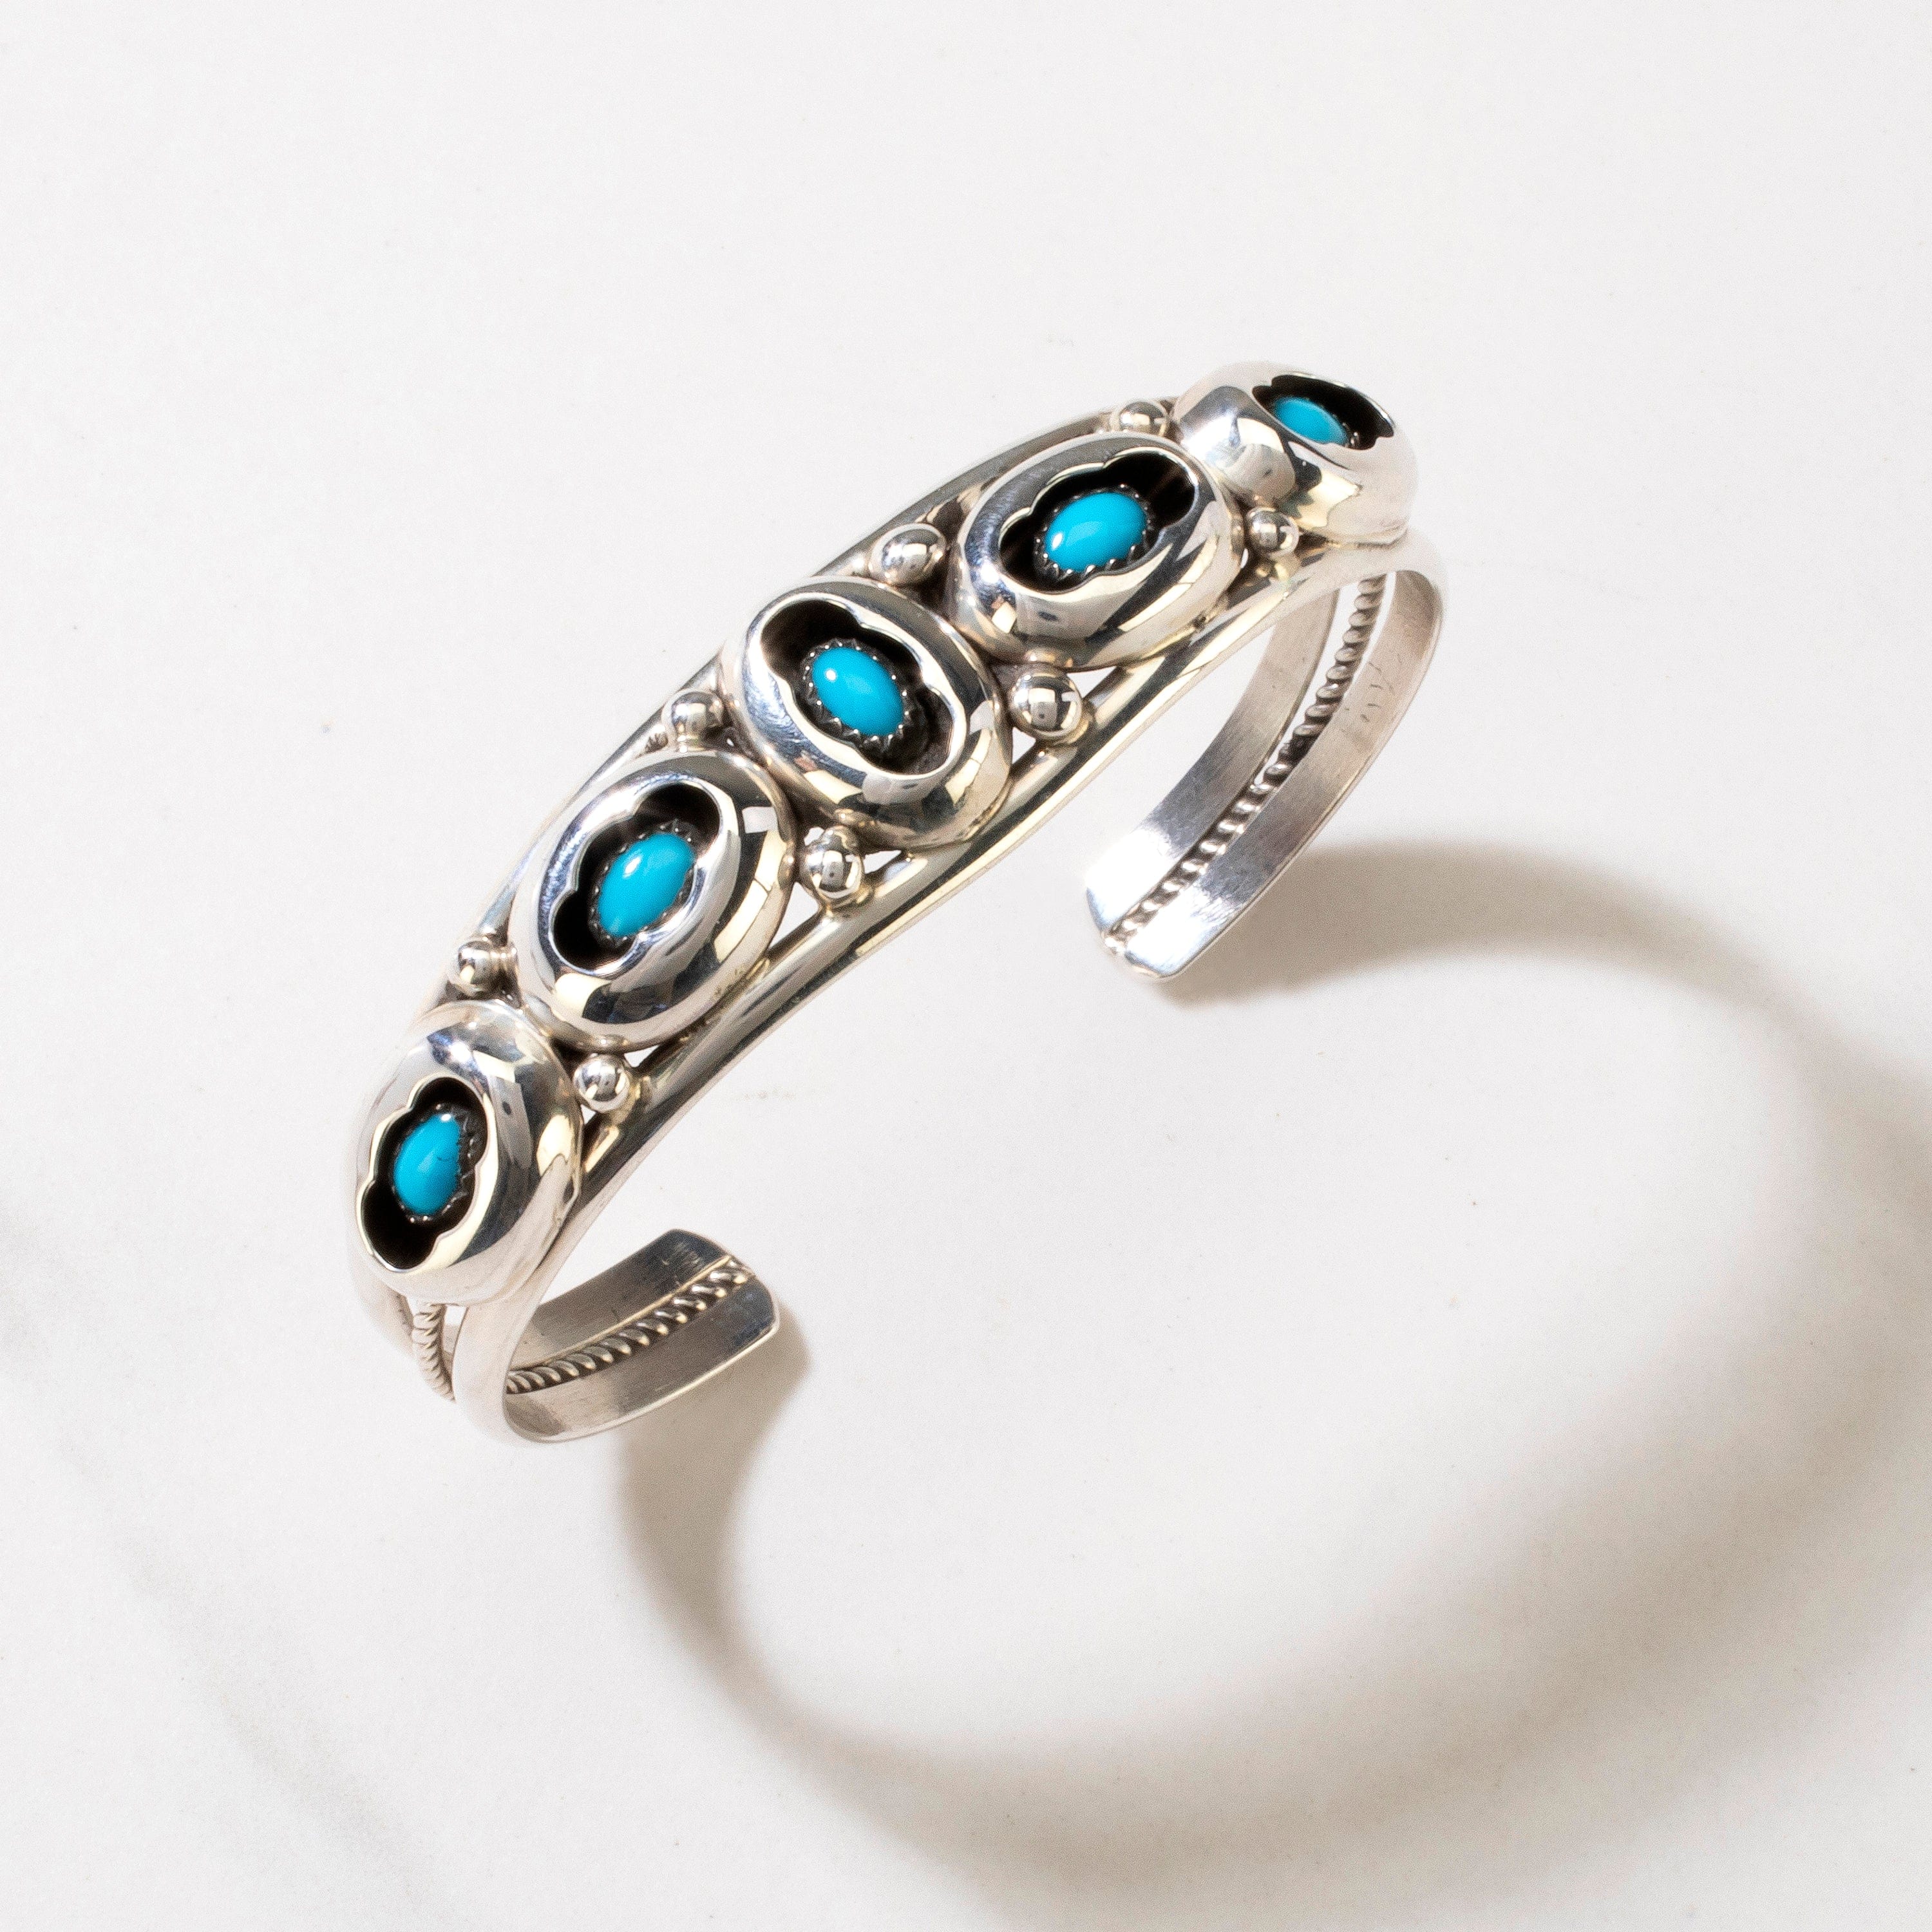 Kalifano Native American Jewelry Kathleen Chavez Sleeping Beauty Turquoise Navajo USA Native American Made 925 Sterling Silver Cuff NAB800.010